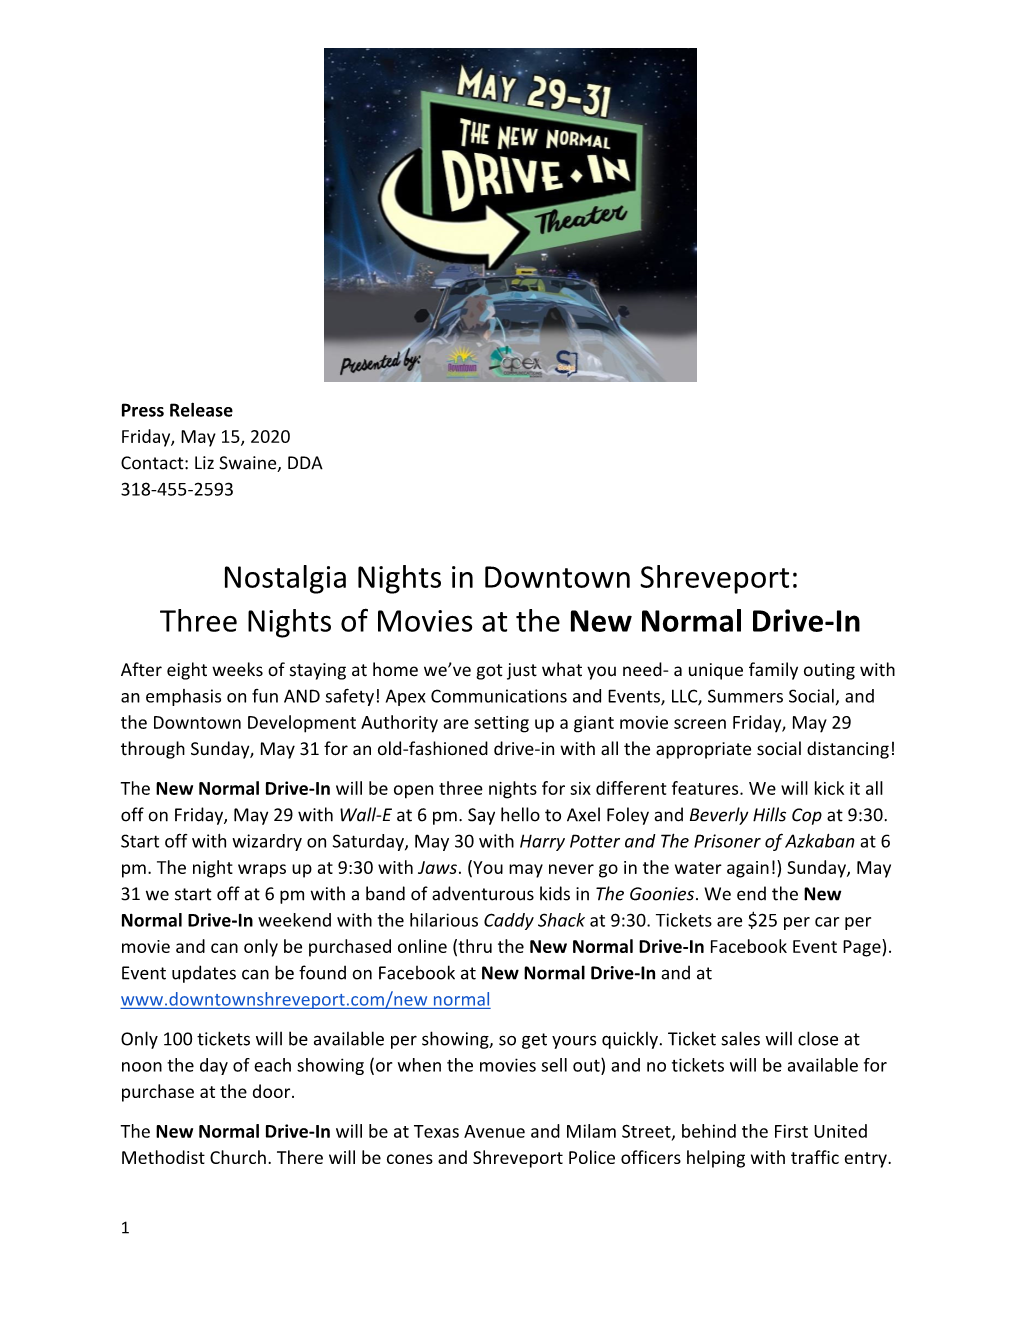 Nostalgia Nights in Downtown Shreveport: Three Nights of Movies at the New Normal Drive‐In